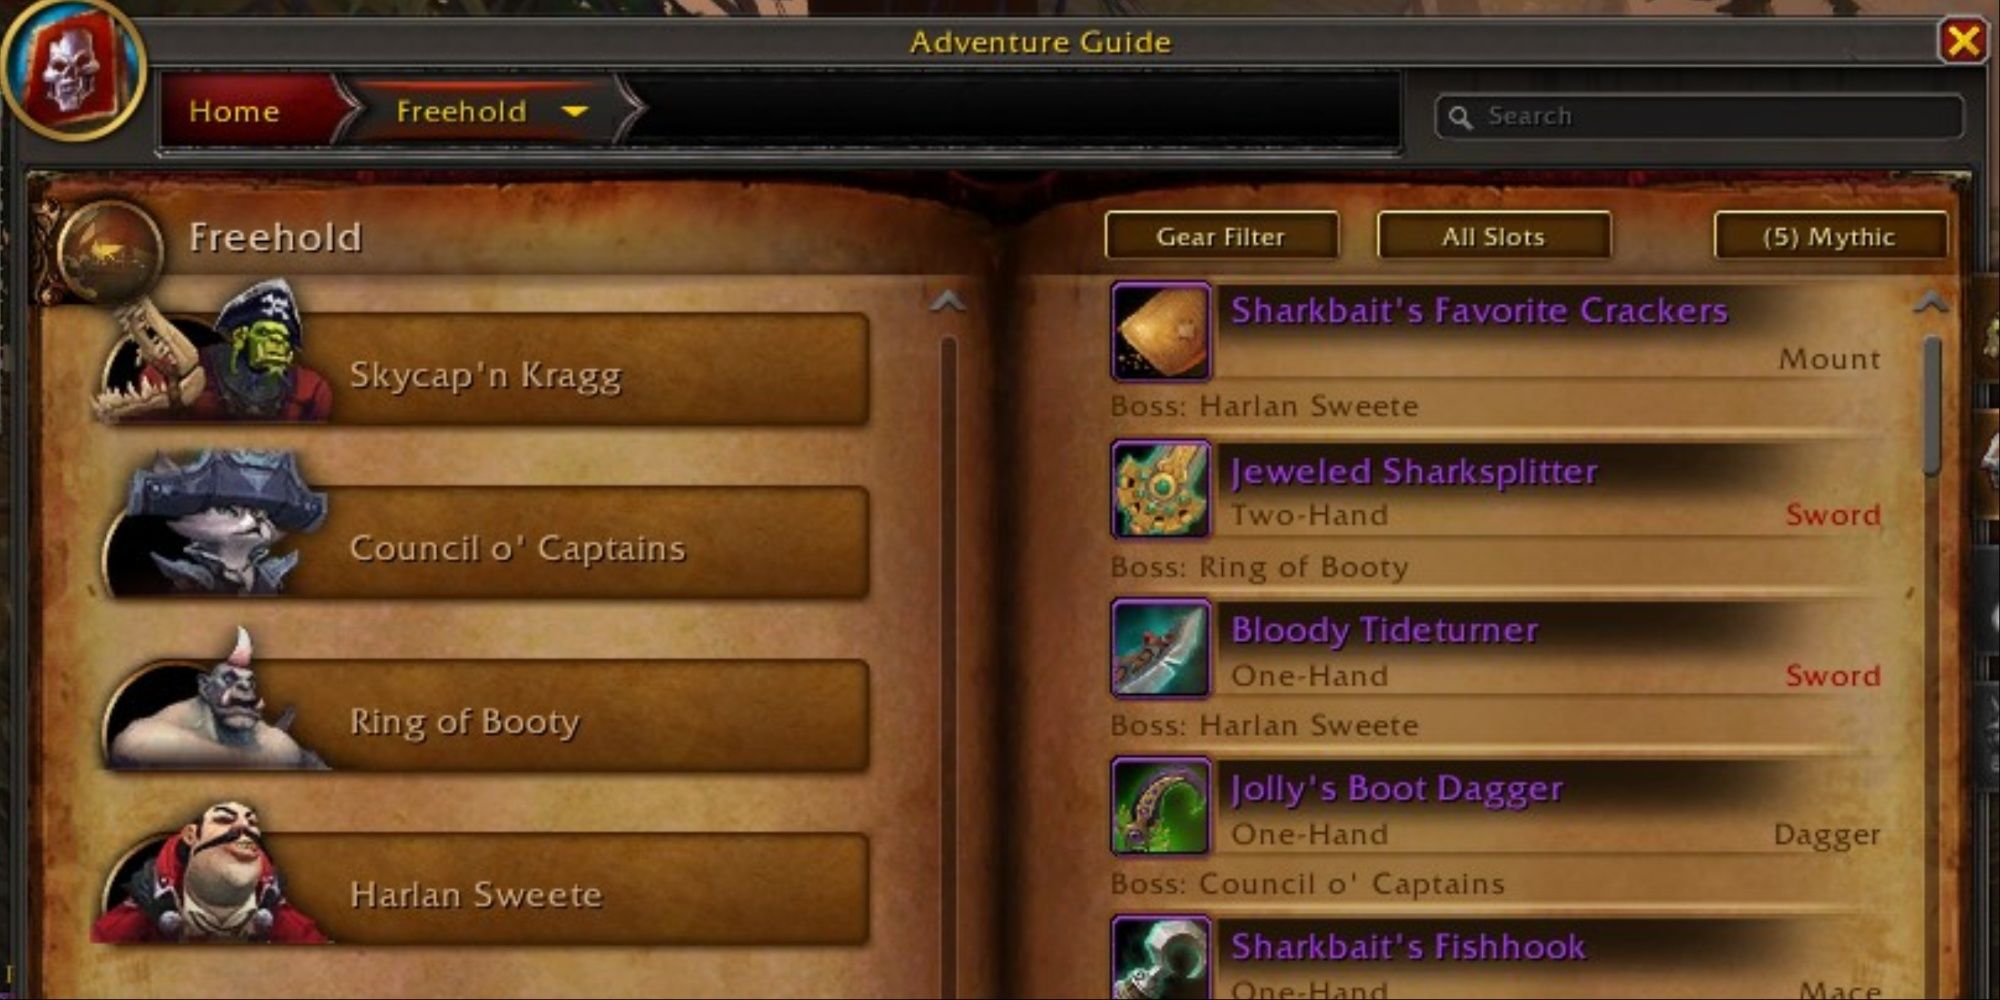 Freehold Loot In Adventure Guide In World Of Warcraft